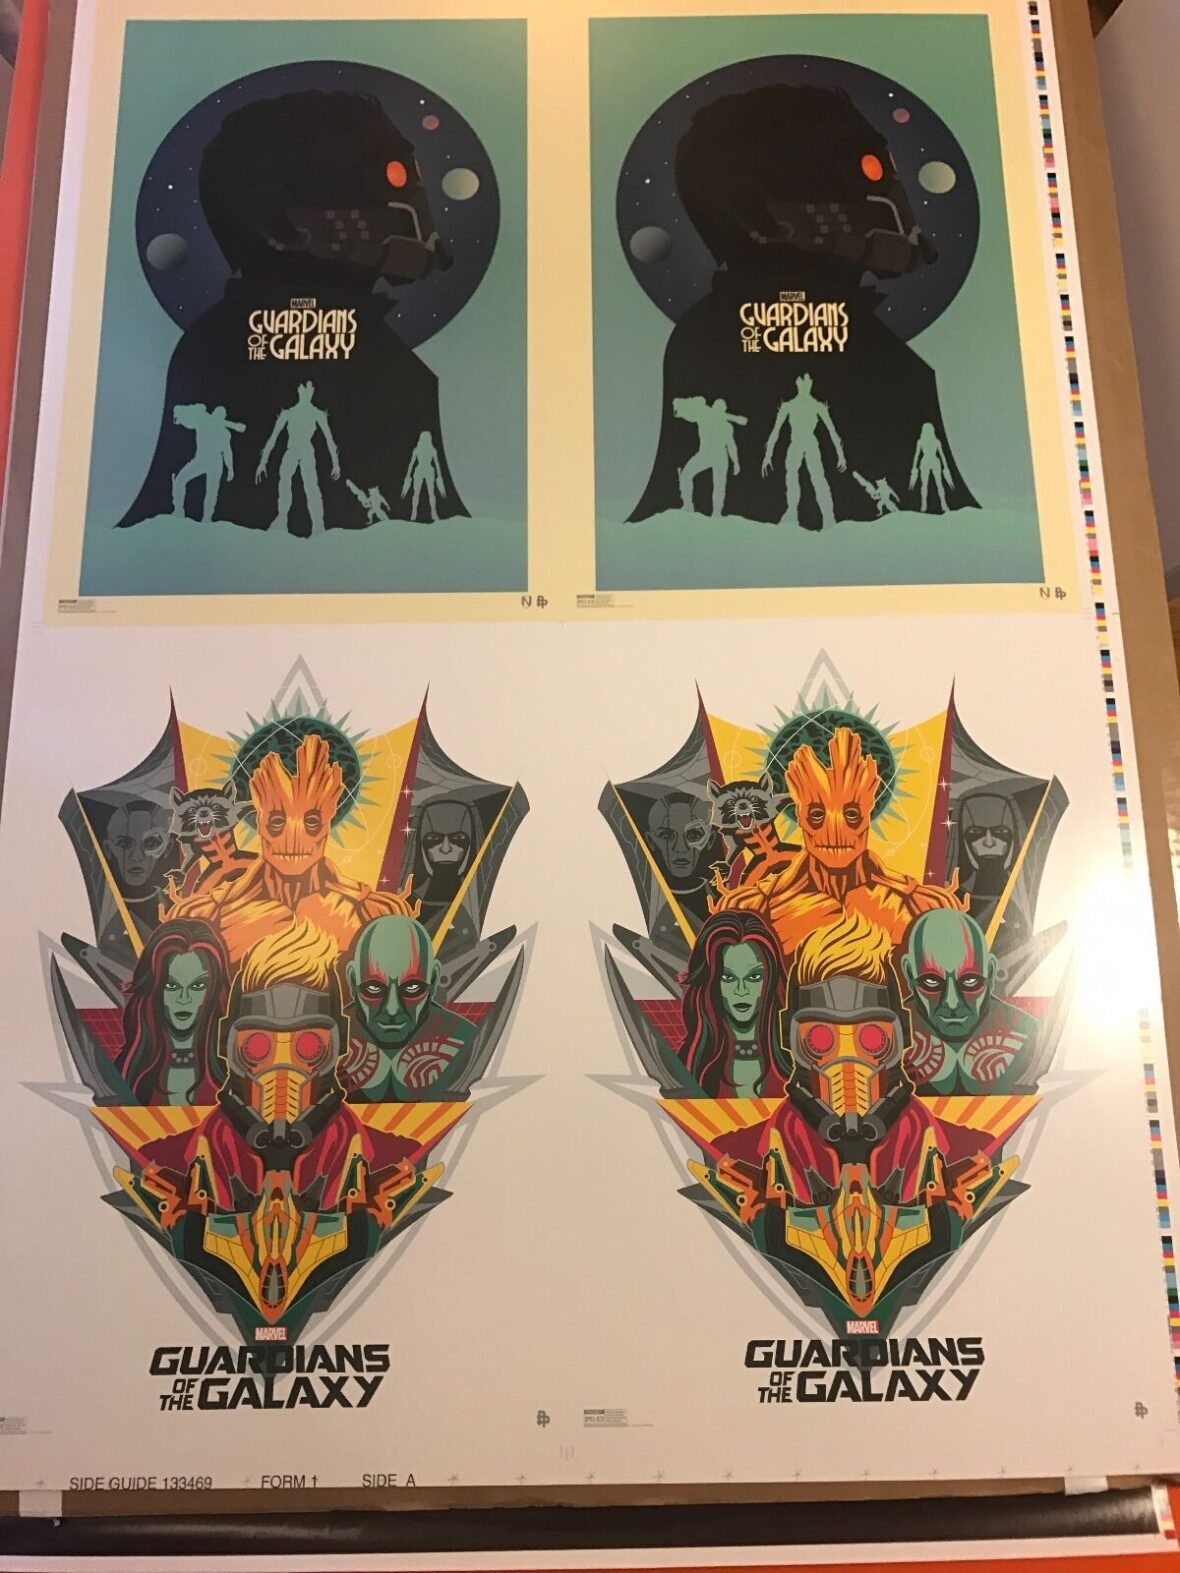 Most Valuable Guardians of the Galaxy Memorabilia: Uncut IMAX Posters